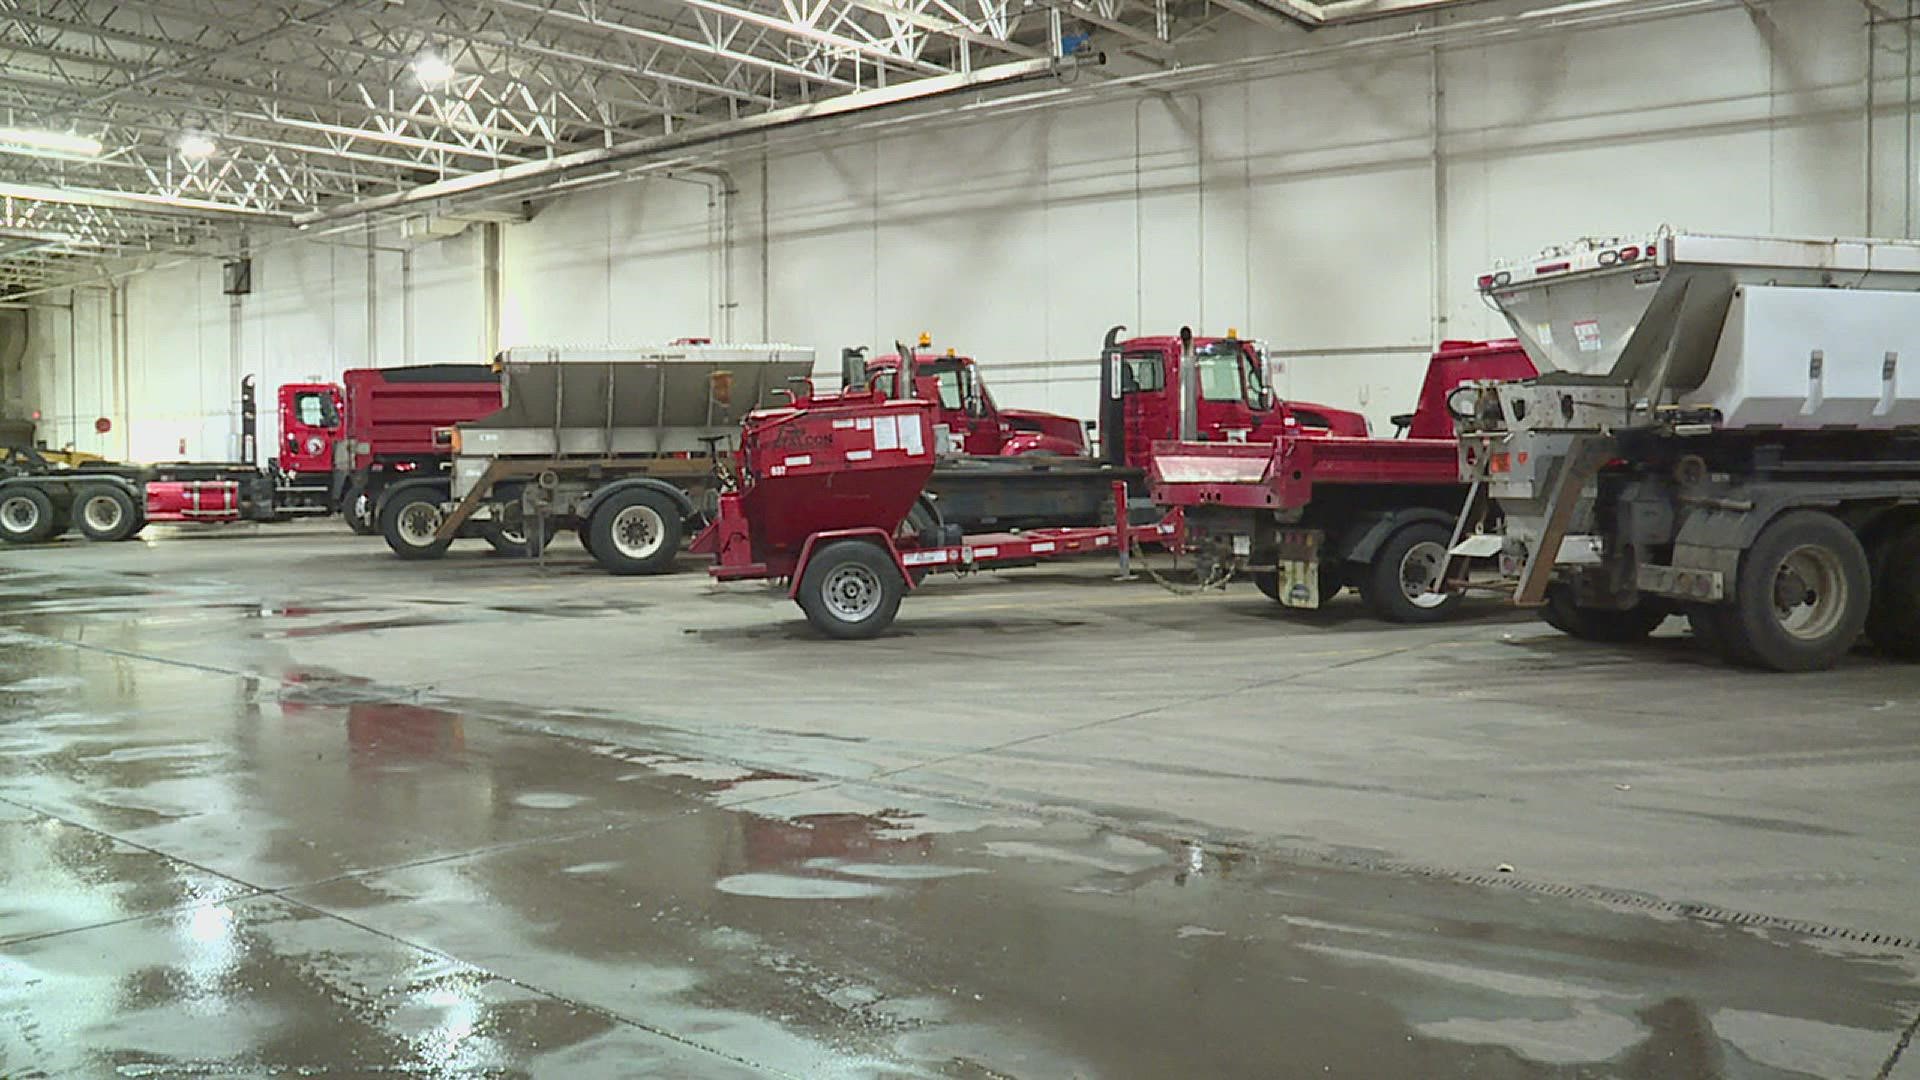 Moline Public Works Department is getting ready for winter weather, but they need some help.